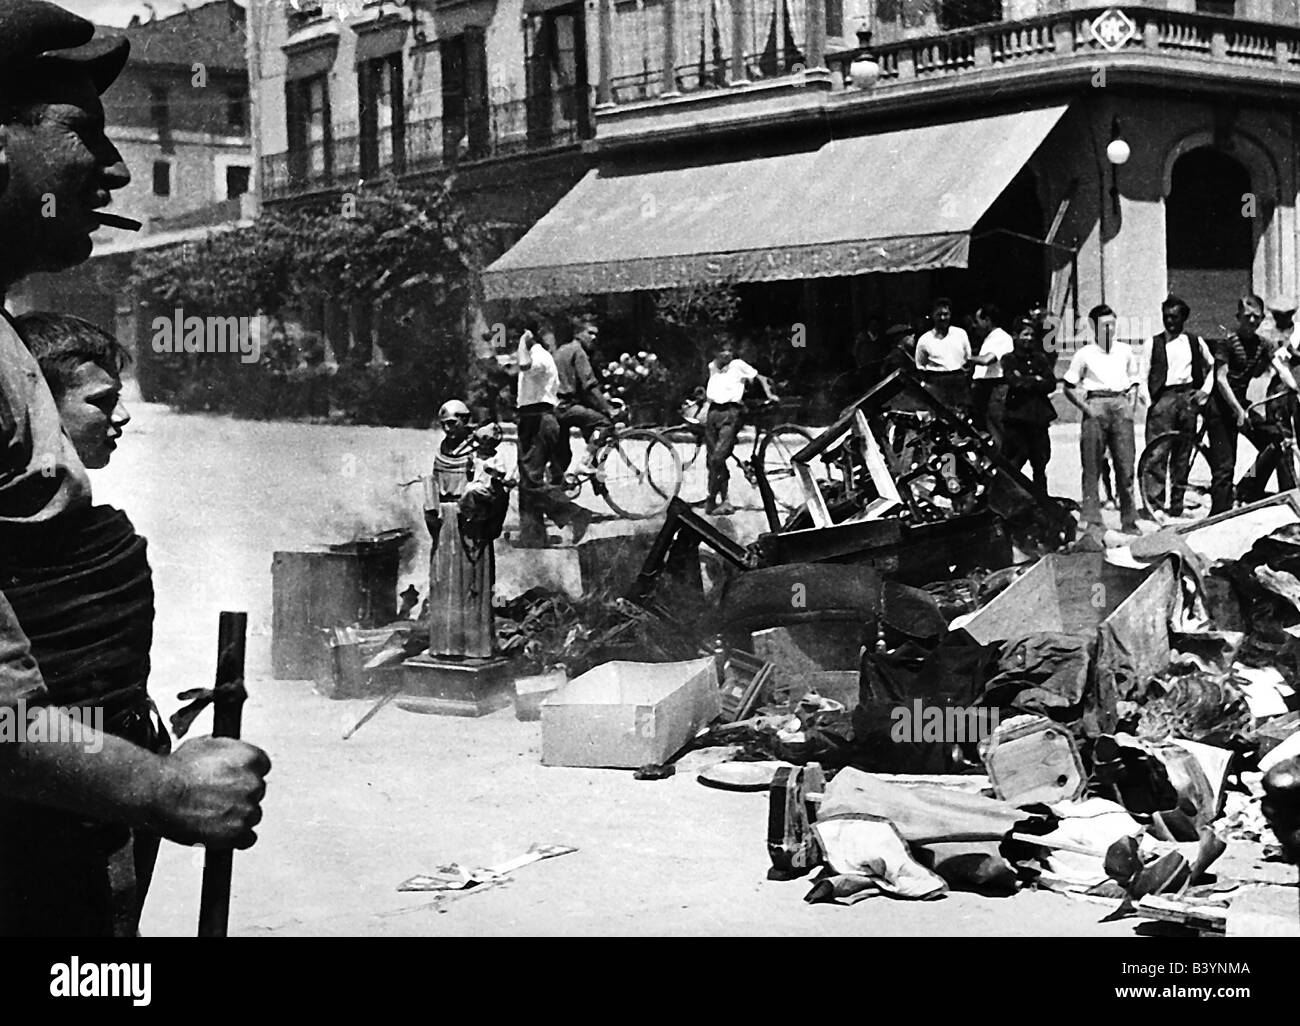 geography / travel, Spain, Spanish Civil War 1936 - 1939, Seg d'Urgel, anarchists burning religious objects, 30.10.1936, historic, historical, 20th century, 1930s, anarchism, anarchy, communism, anti-religious, antireligious, religion, Europe, male, man, men, people, Stock Photo